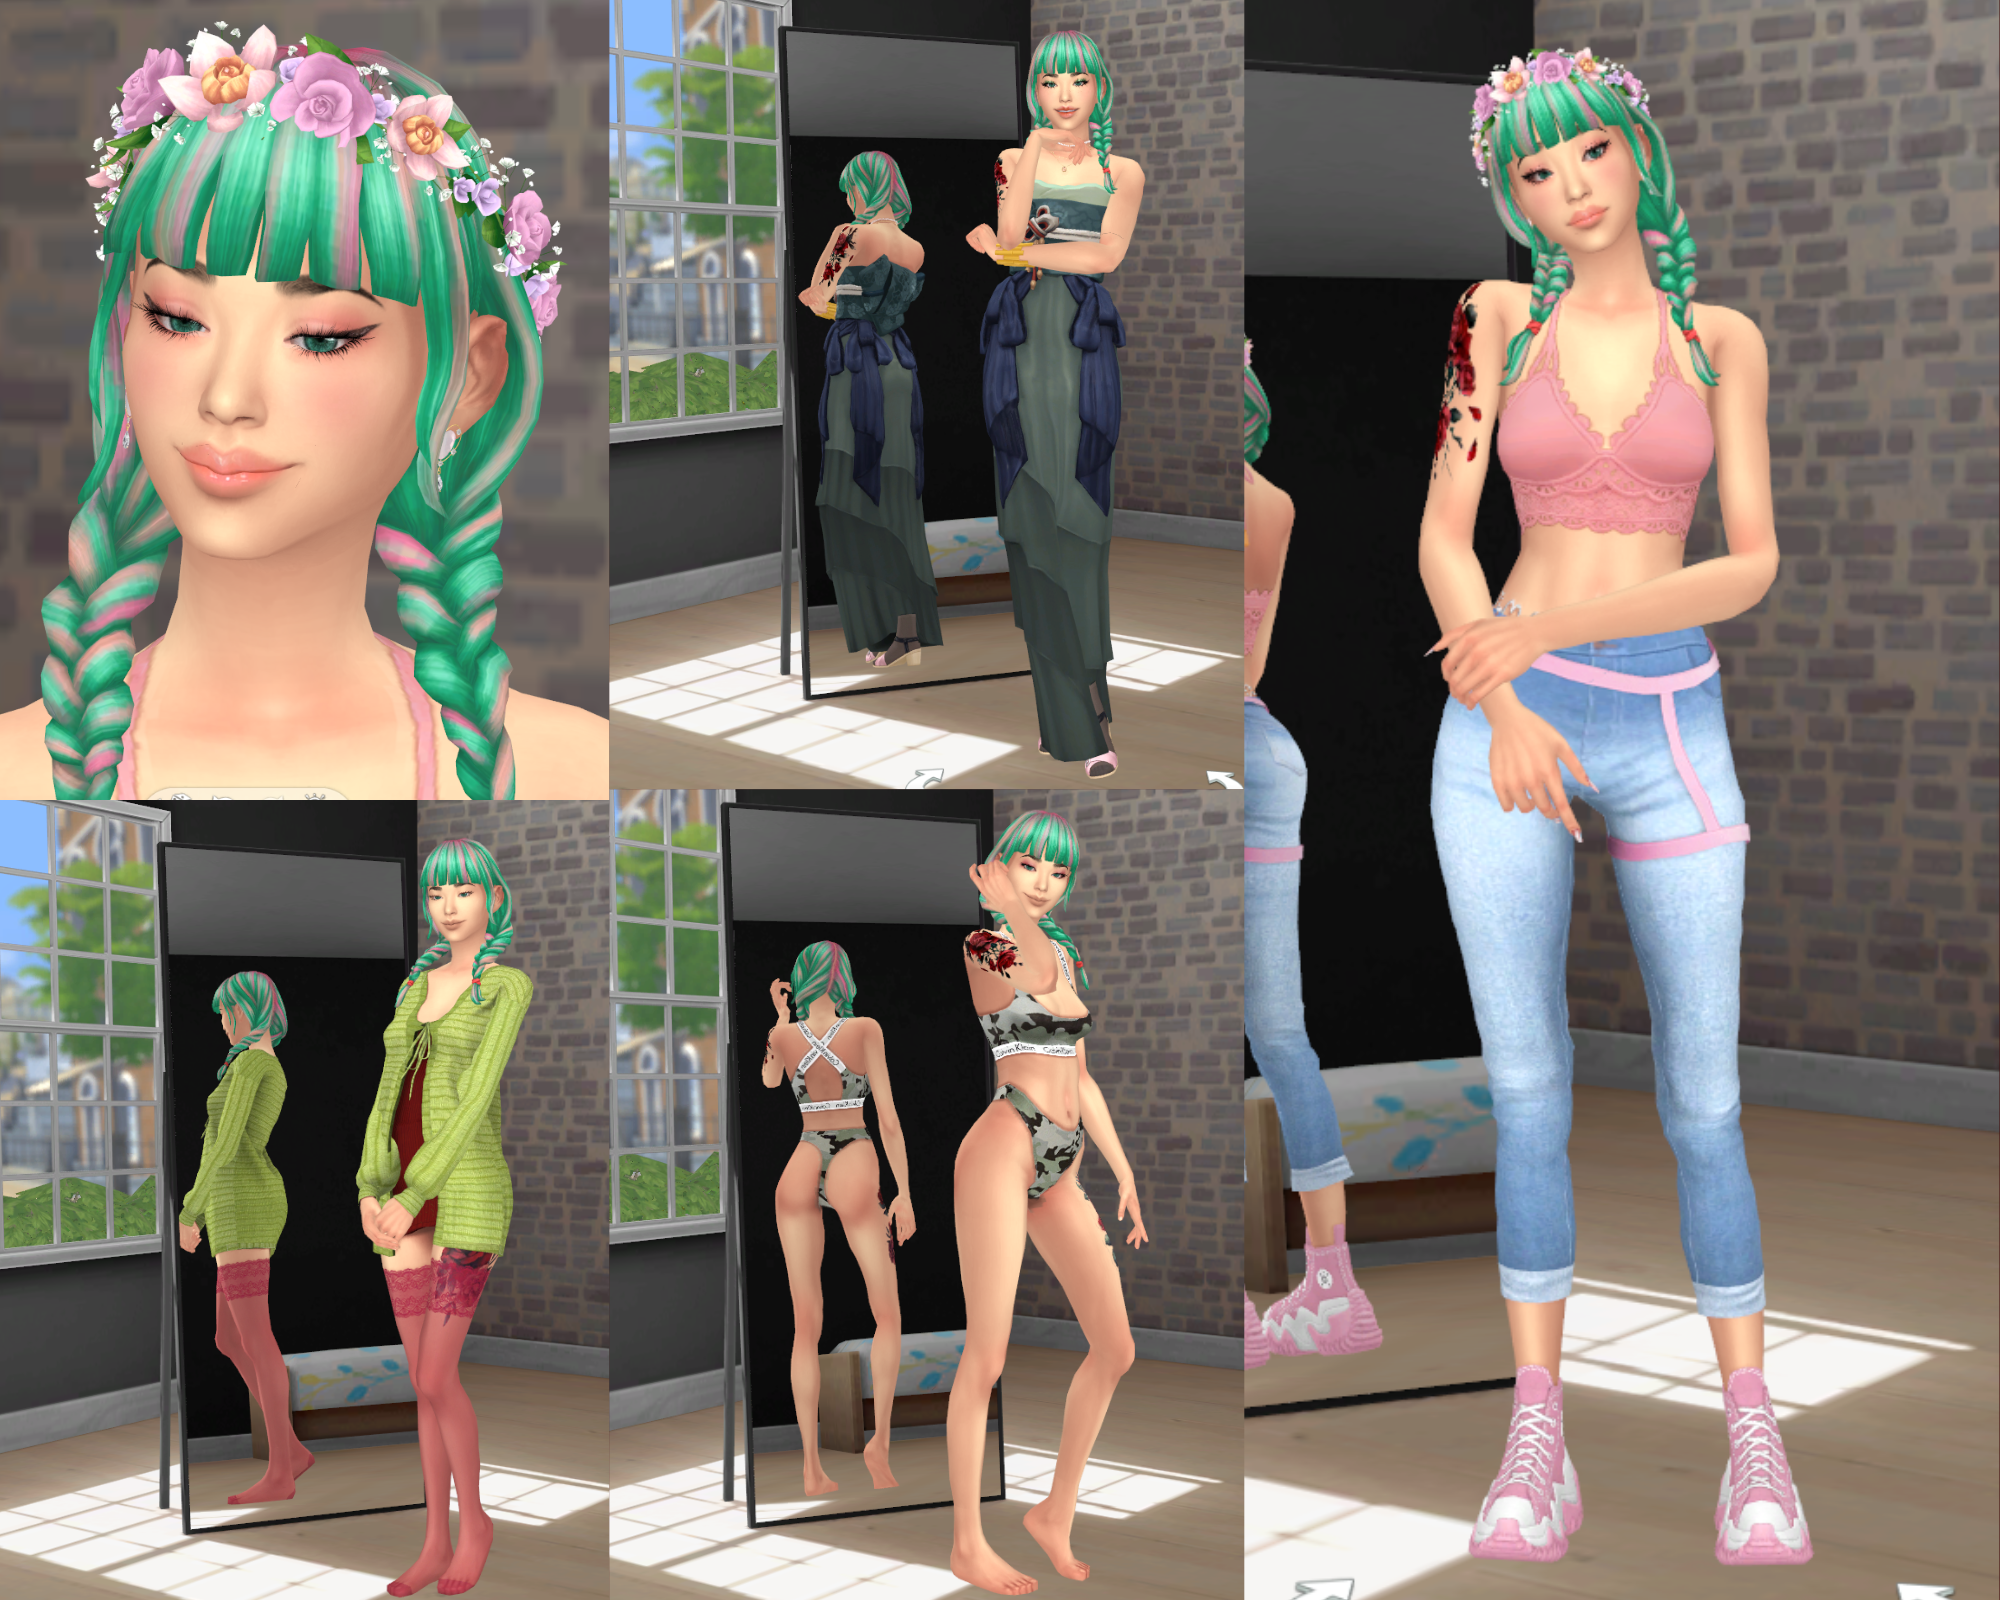 ⋆ ˚｡⋆୨୧˚ Townie Makeover ˚୨୧⋆｡˚ ⋆